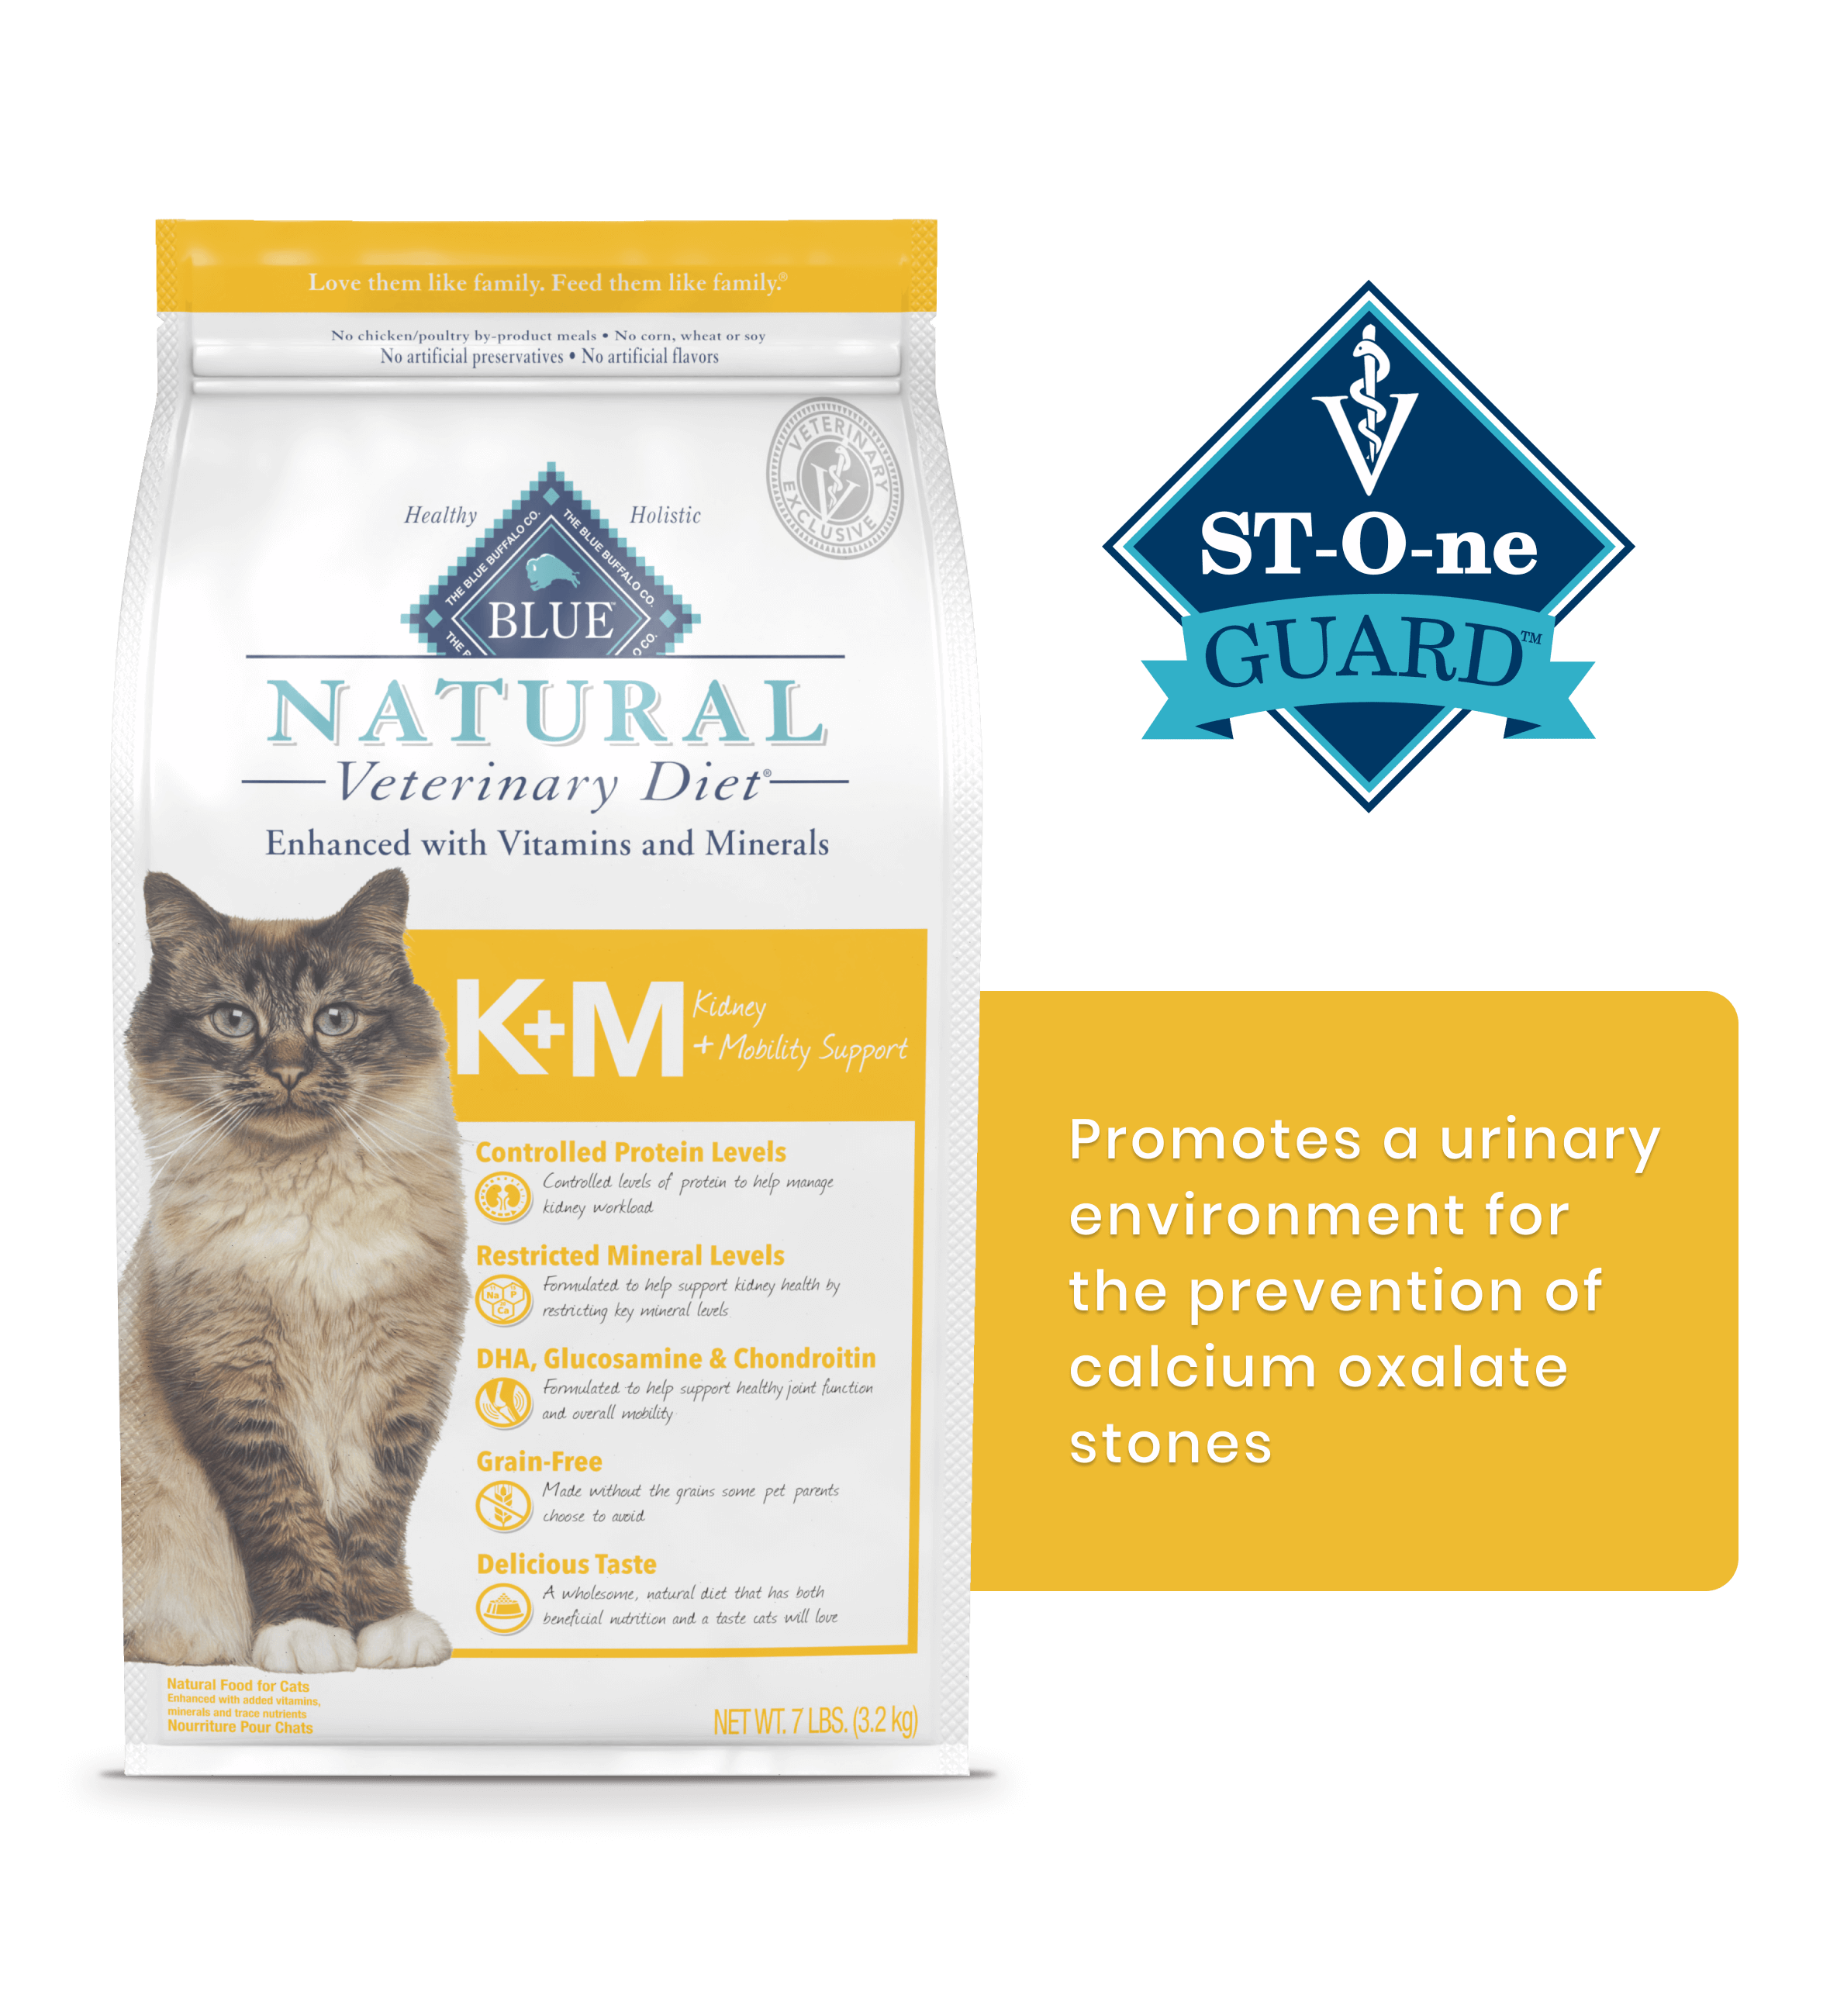 K+M Kidney + Mobility Support St-O-ne Guard Promotes a urinary environment for the prevention of calcium oxalate stones